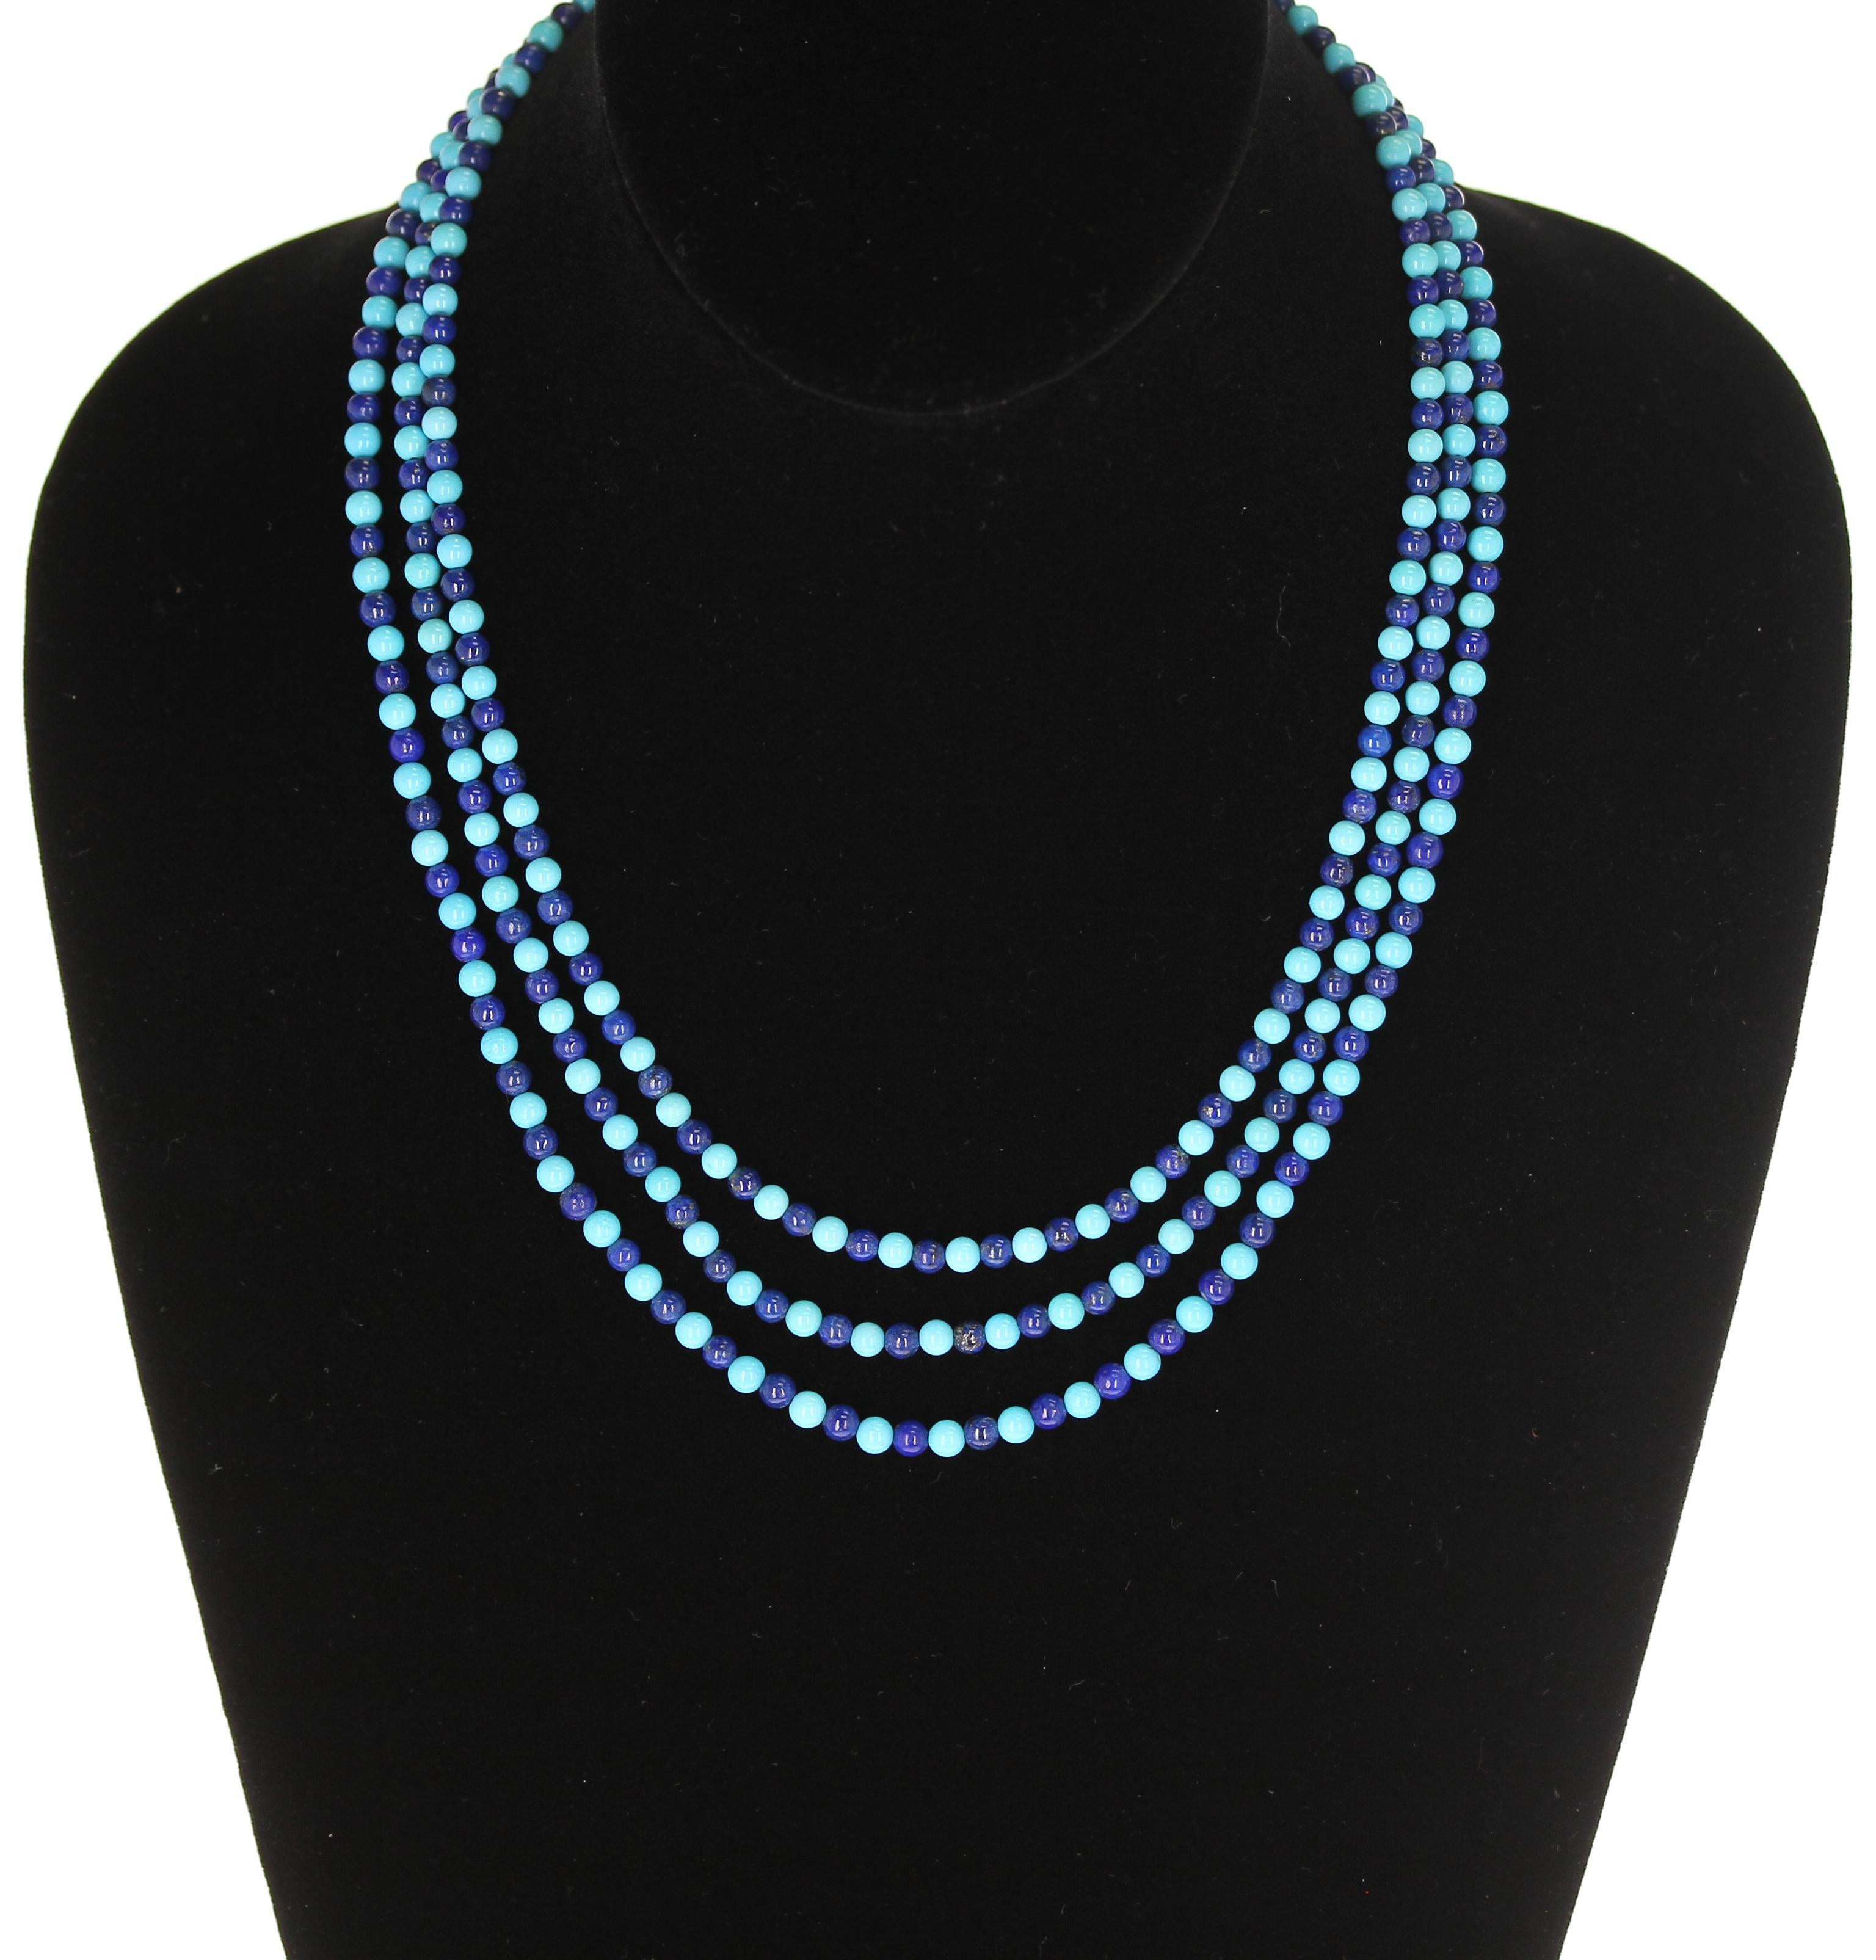 A 4MM Genuine Turquoise and Lapis Lazuli Beads Necklace with three strands, ranging from 17.5